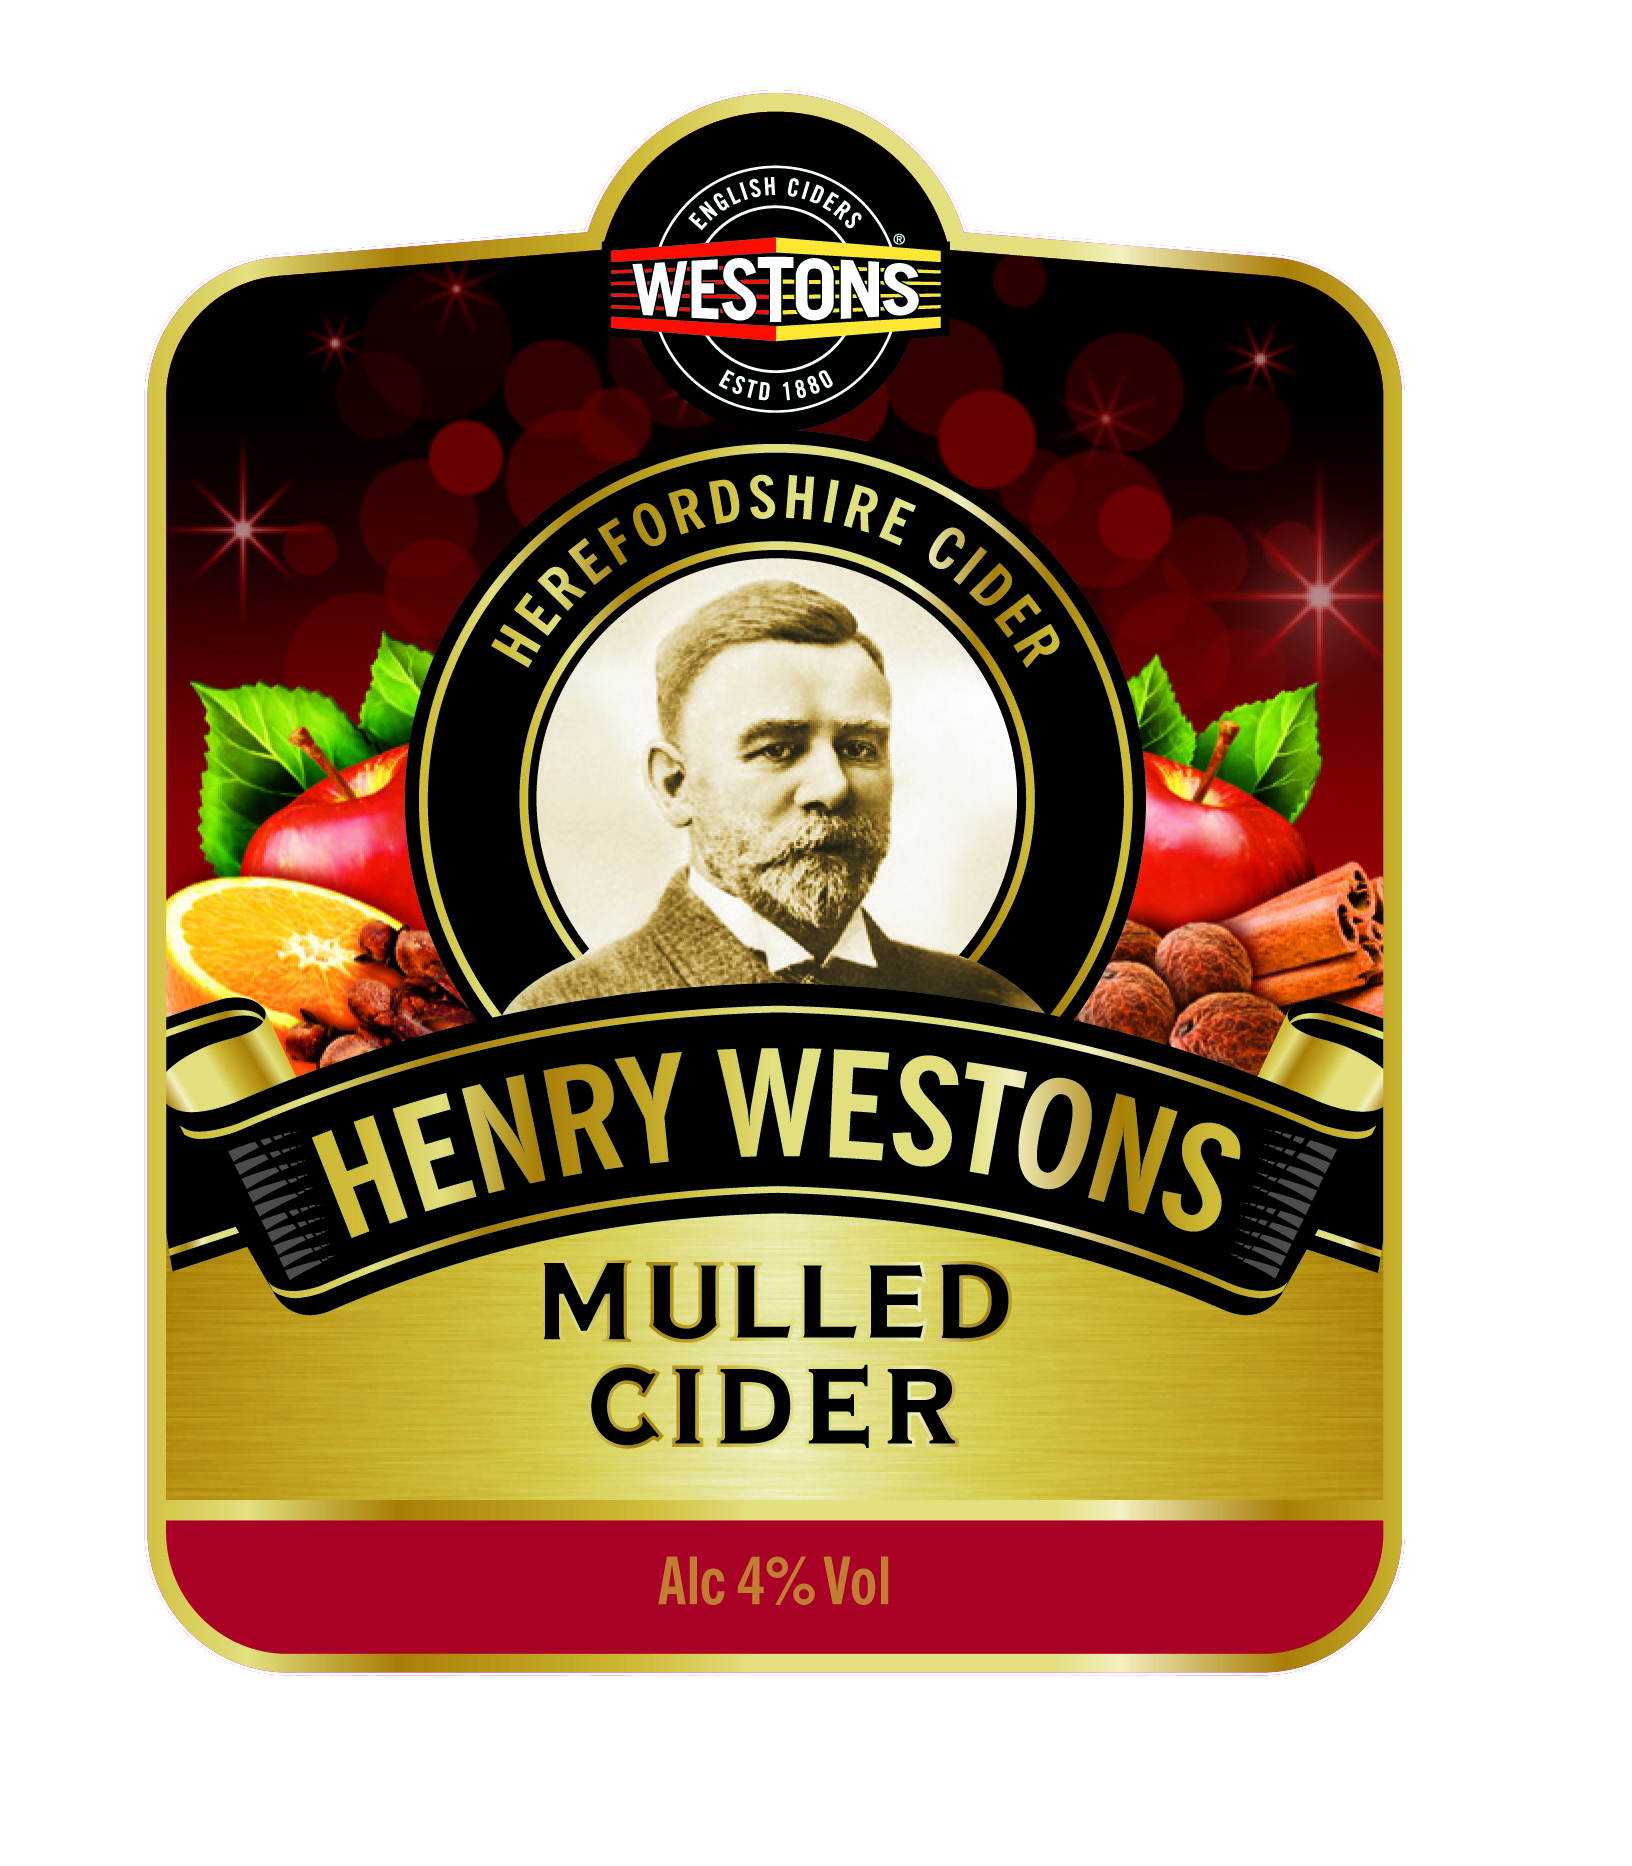 WESTONS MULLED CIDER